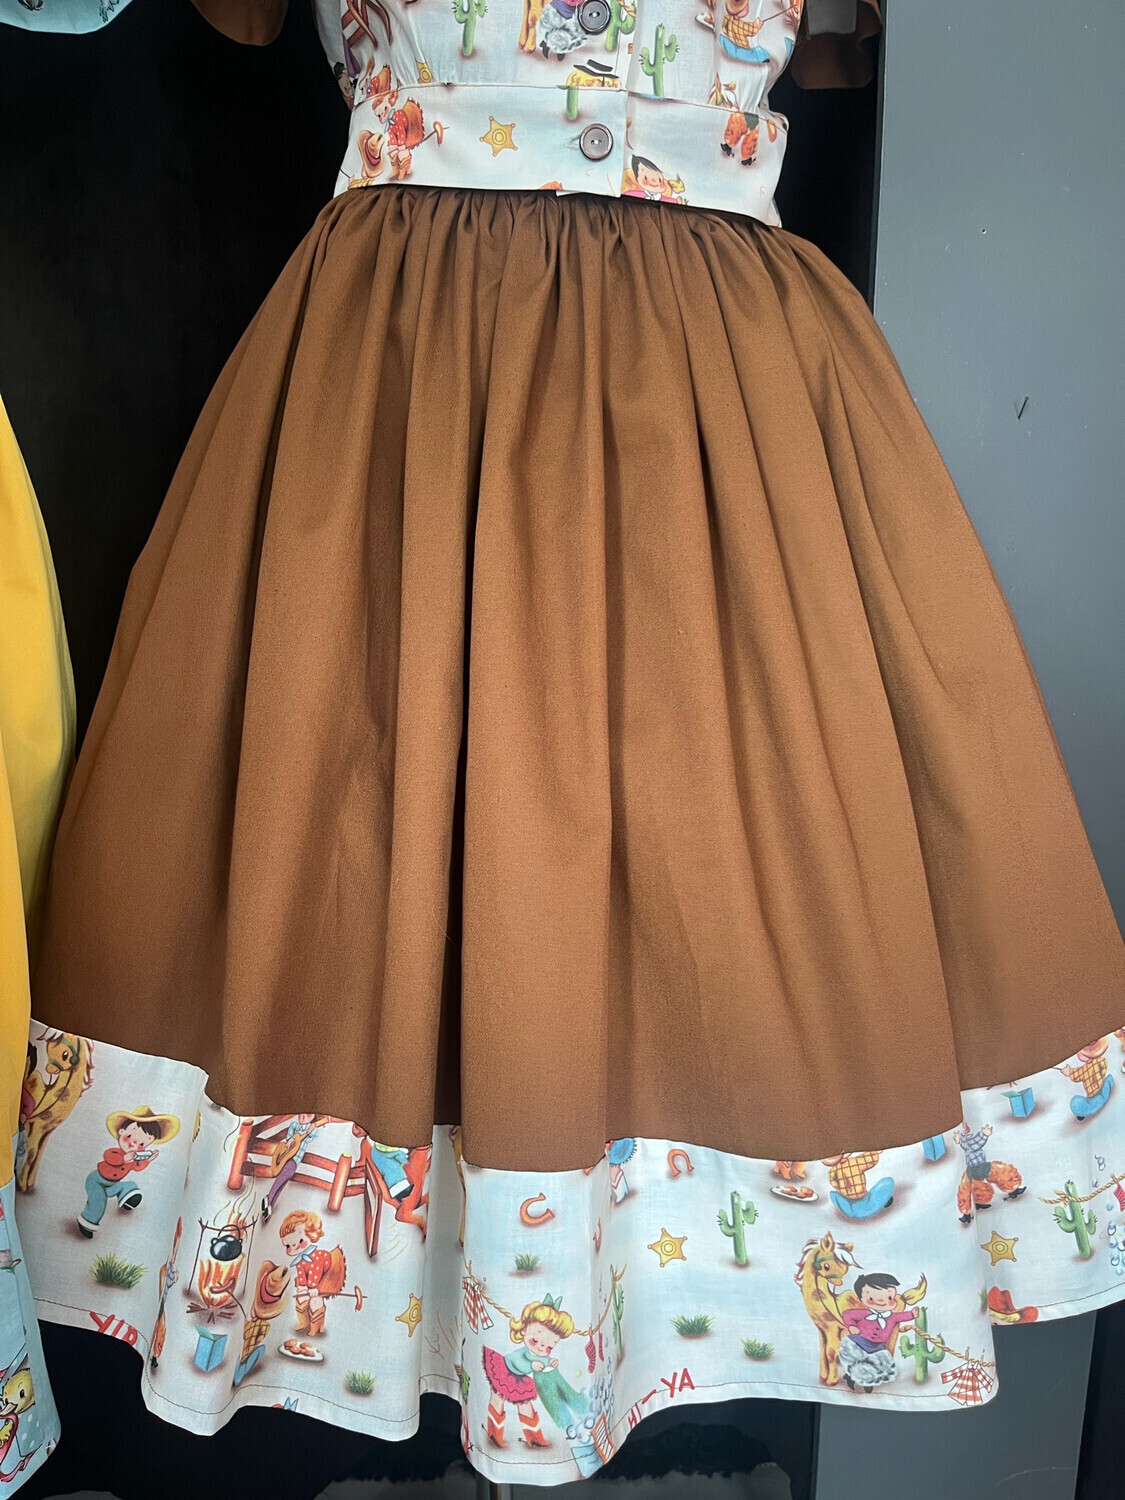 Yip-ee & Spring pets skirt